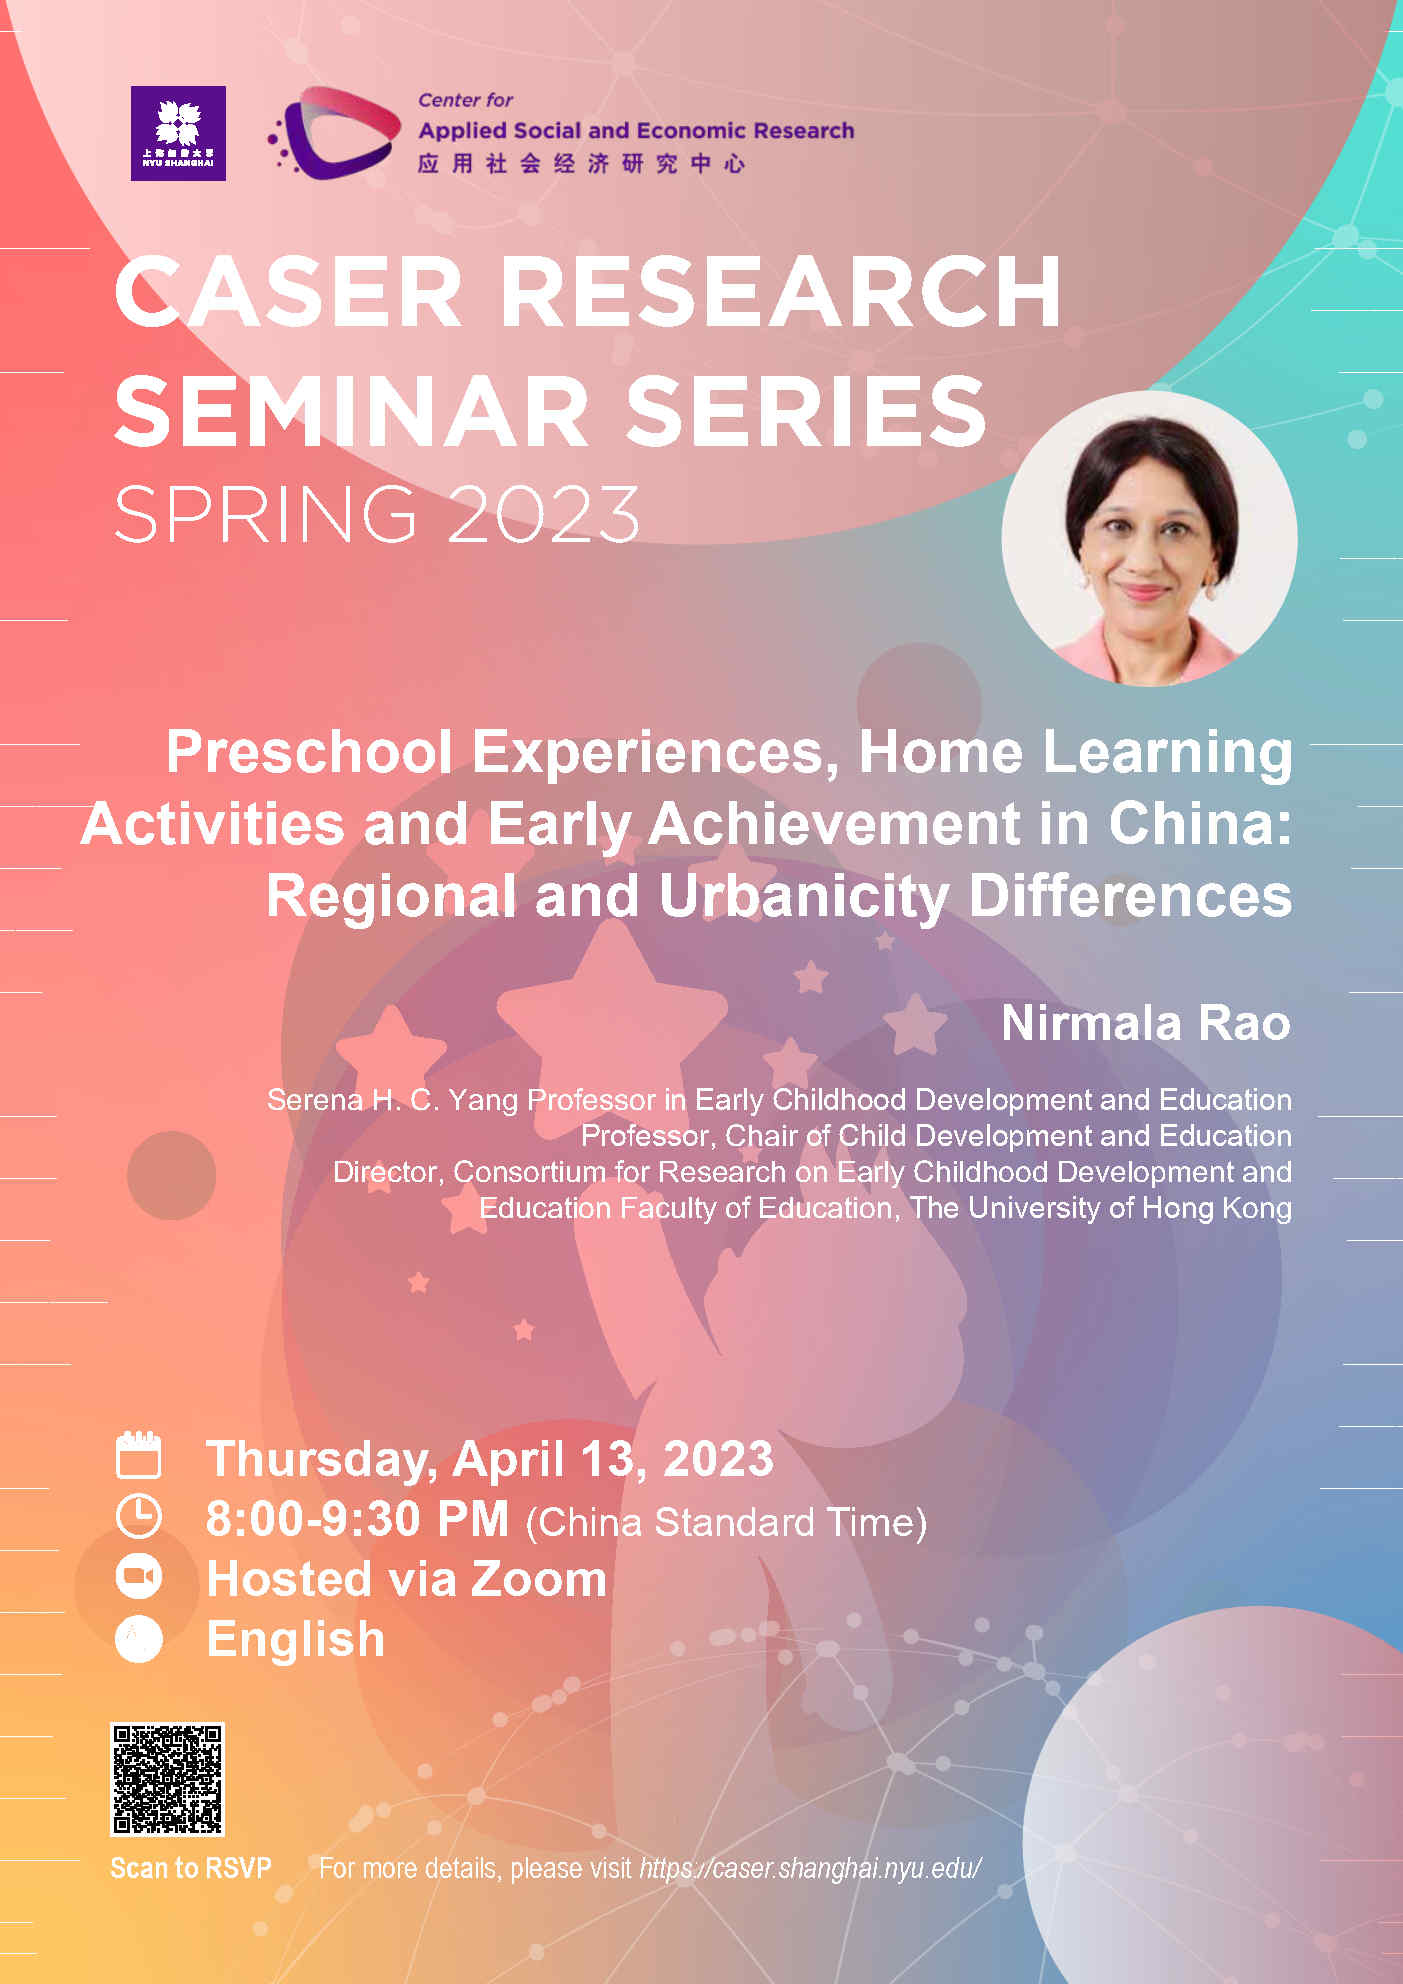 – Center for Applied Social and Economic Research (CASER) Research Seminar Series – Spring 2023